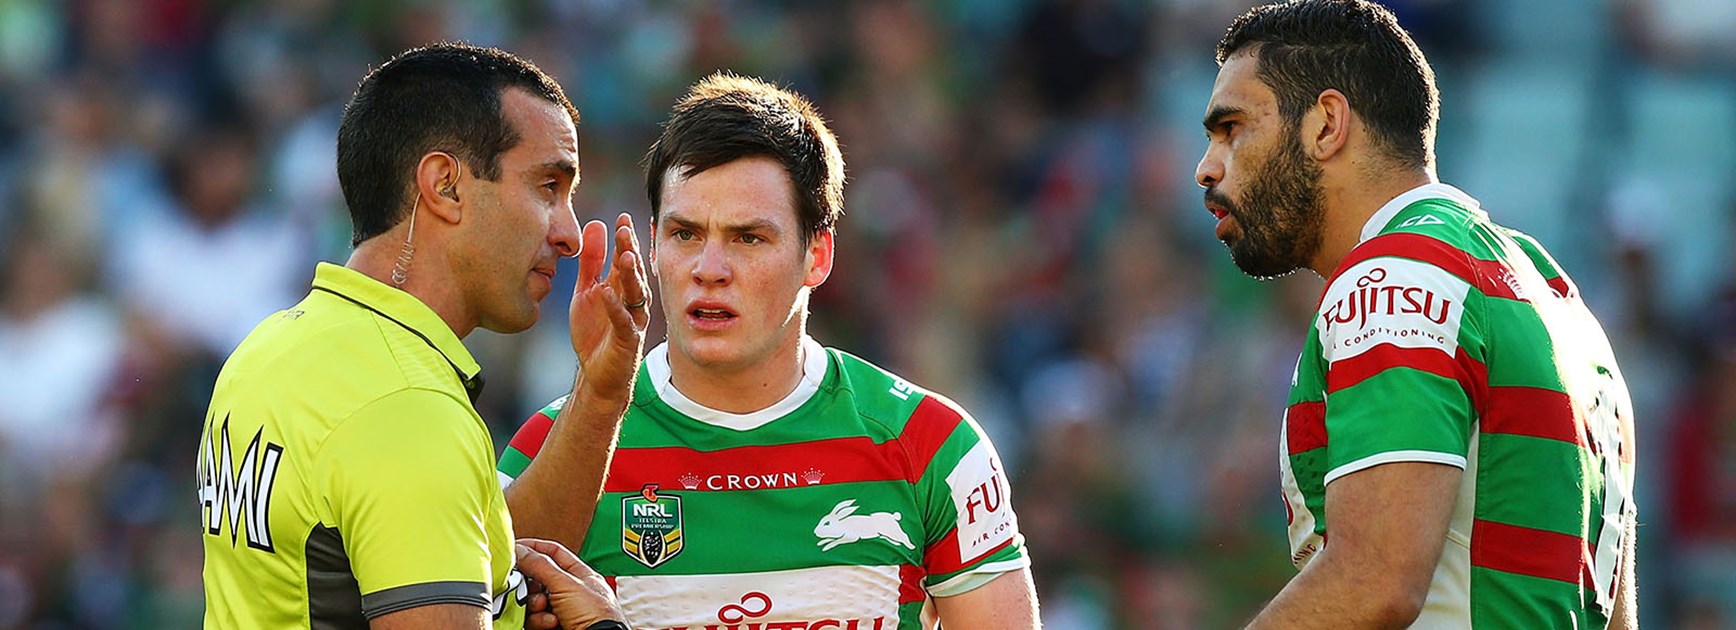 Luke Keary is put on report for a suspected eye gouge.